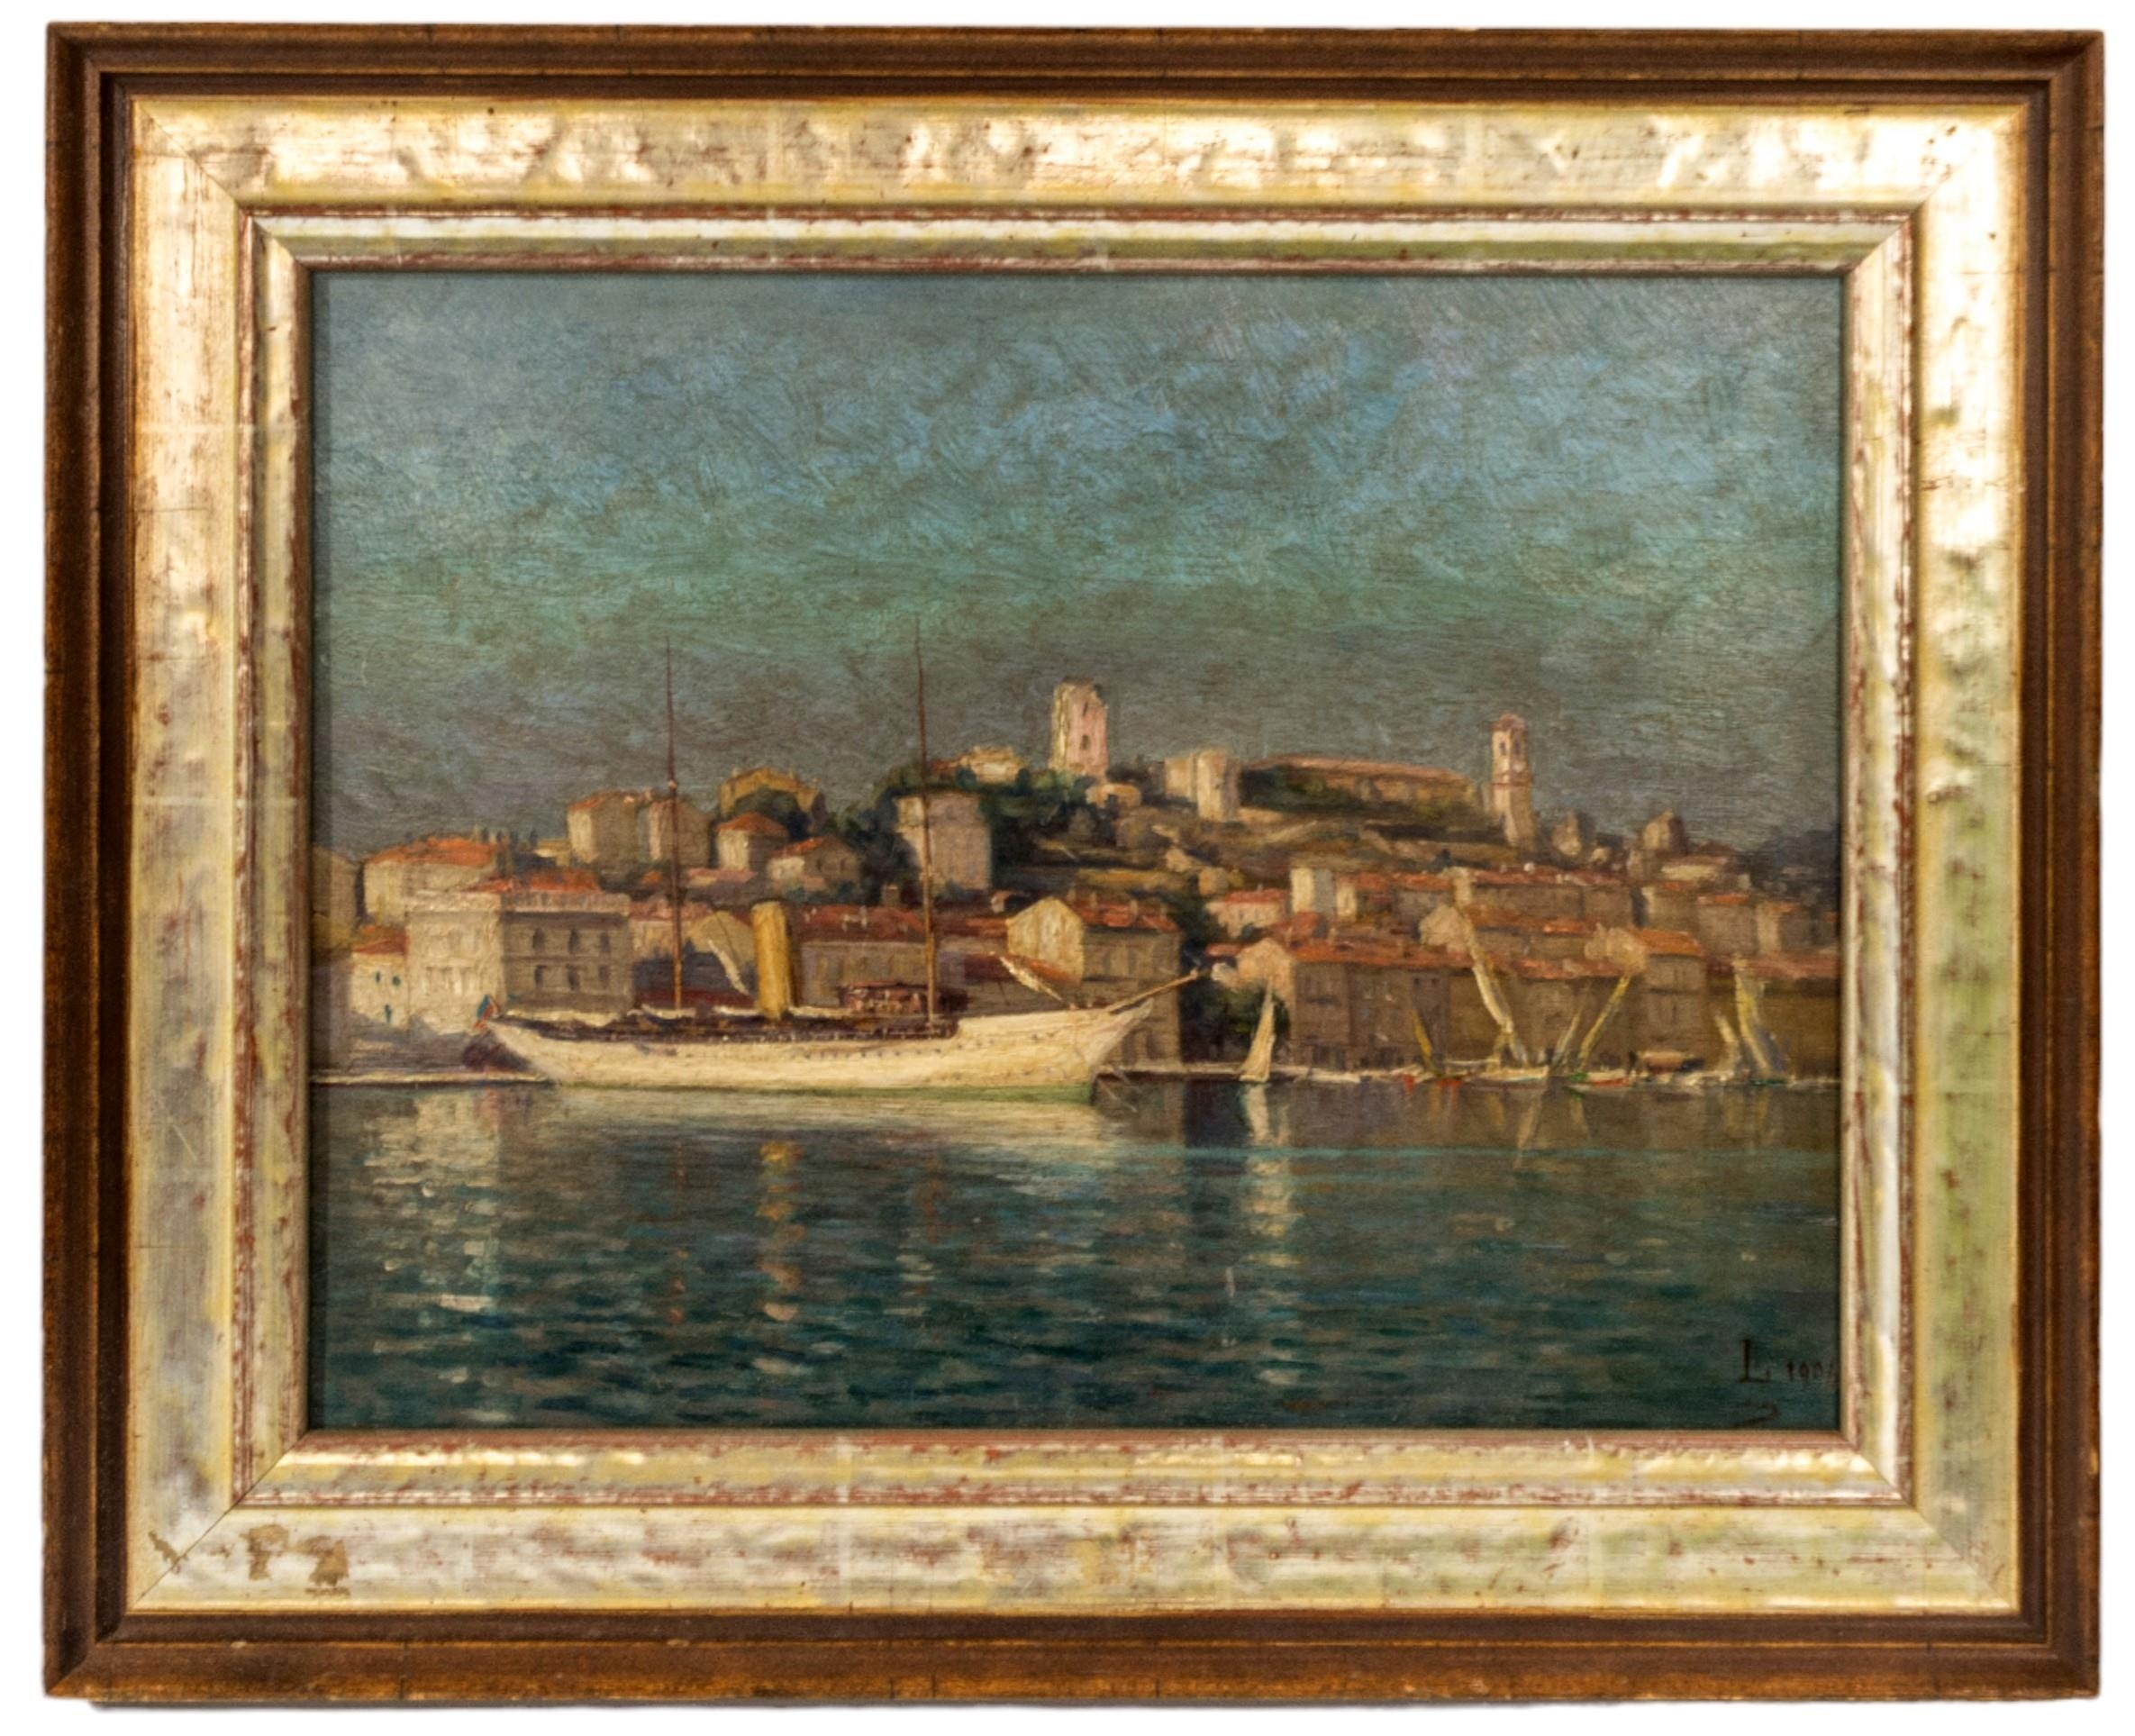 A MEDITERRANEAN HARBOUR SCENE OIL PAINTING, EARLY 20TH CENTURY, depicting a single funnel ship